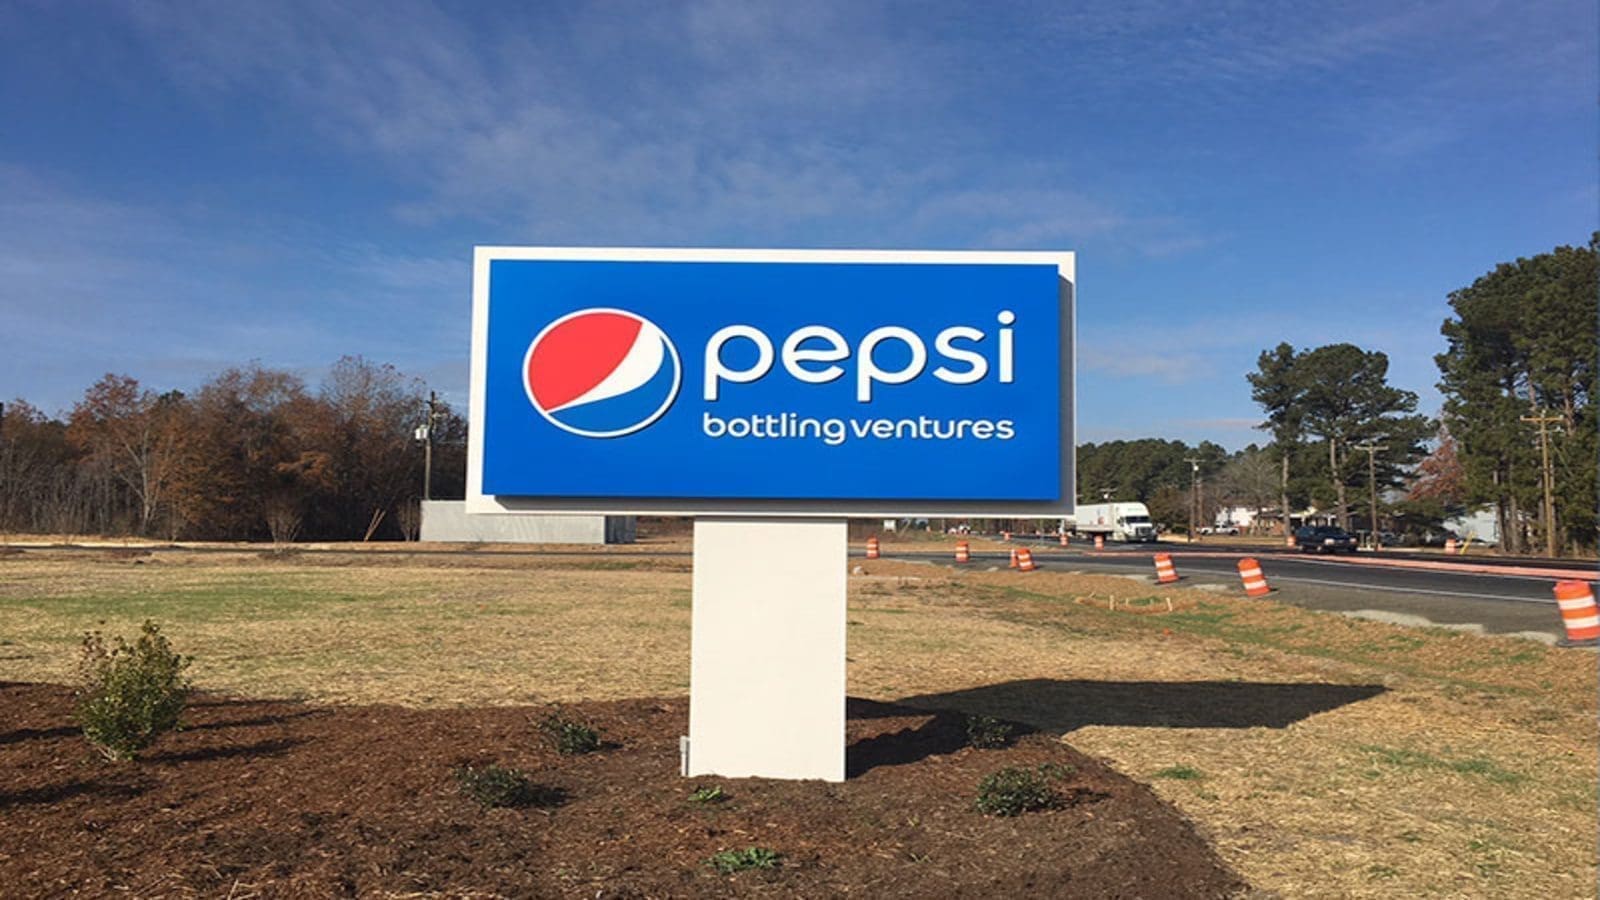 Pepsi Bottling Ventures invests US35M in new bottling line to increase production